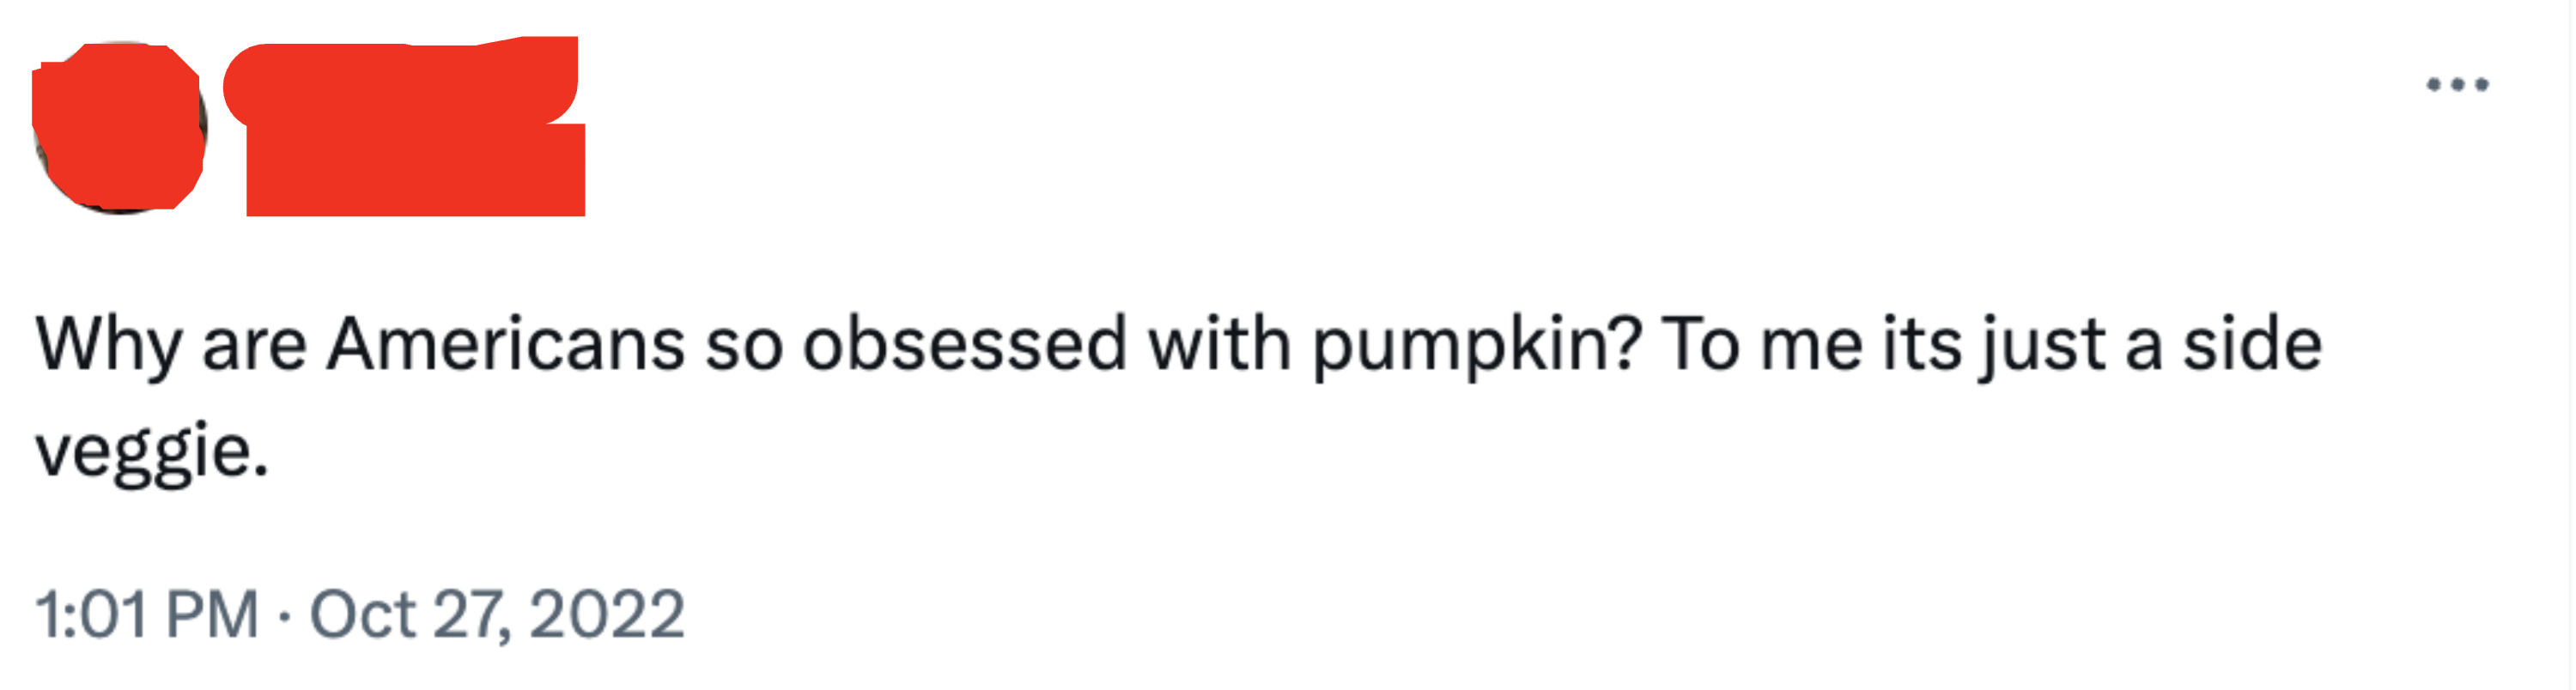 Why are Americans so obsessed with pumpkin? To me its just a side veggie